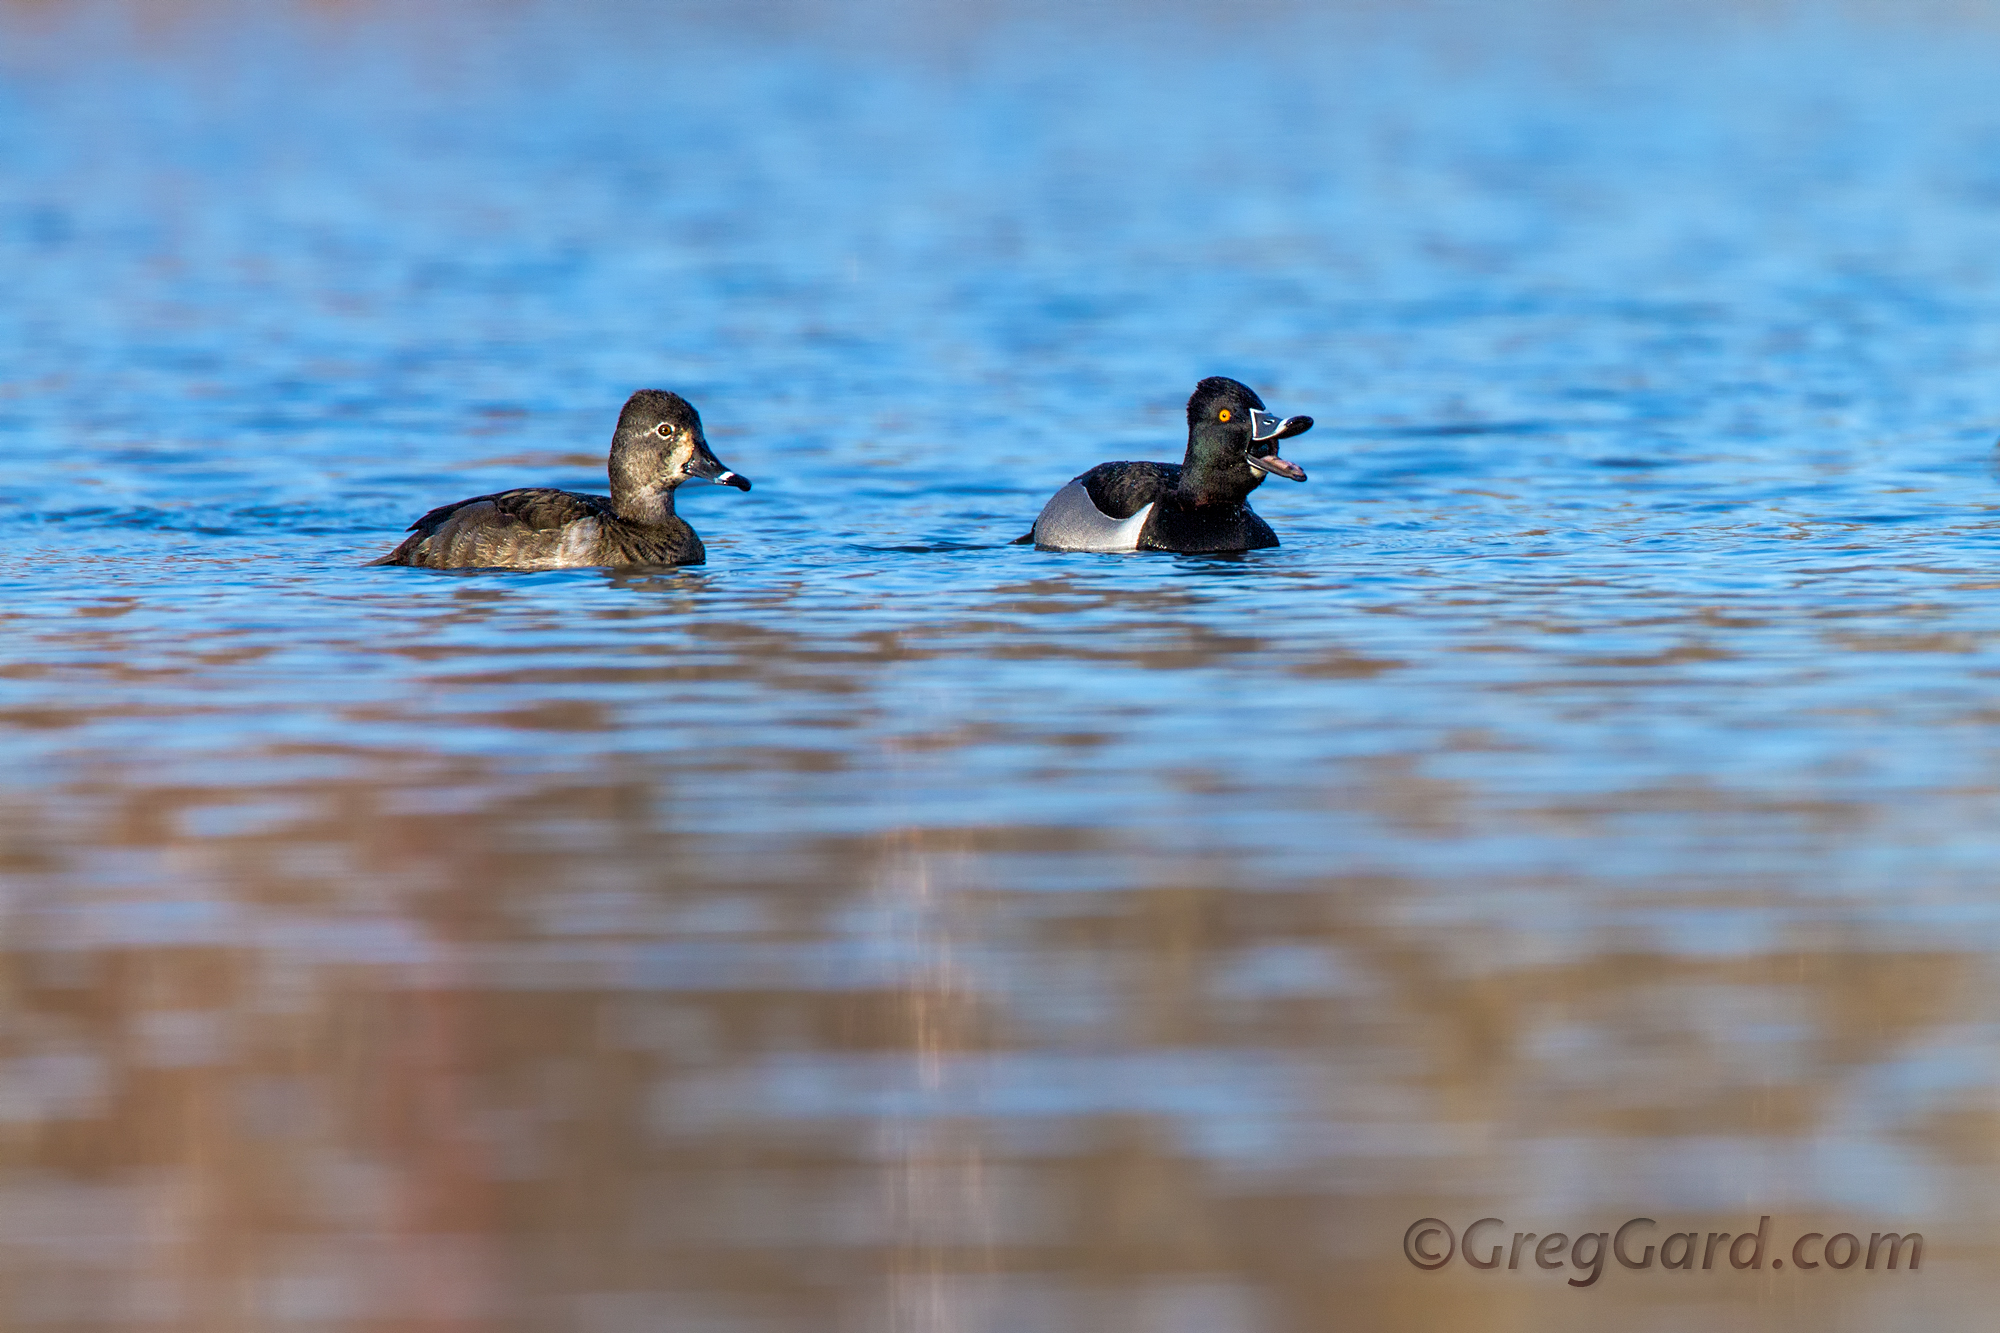  Aythya collaris

Waldwick, New Jersey

The adult male is similar in color pattern to the Eurasian Tufted Duck, its relative. It has a grey bill with a white band, a shiny purple head, a white breast, yellow eyes and a dark grey back. The adult femal